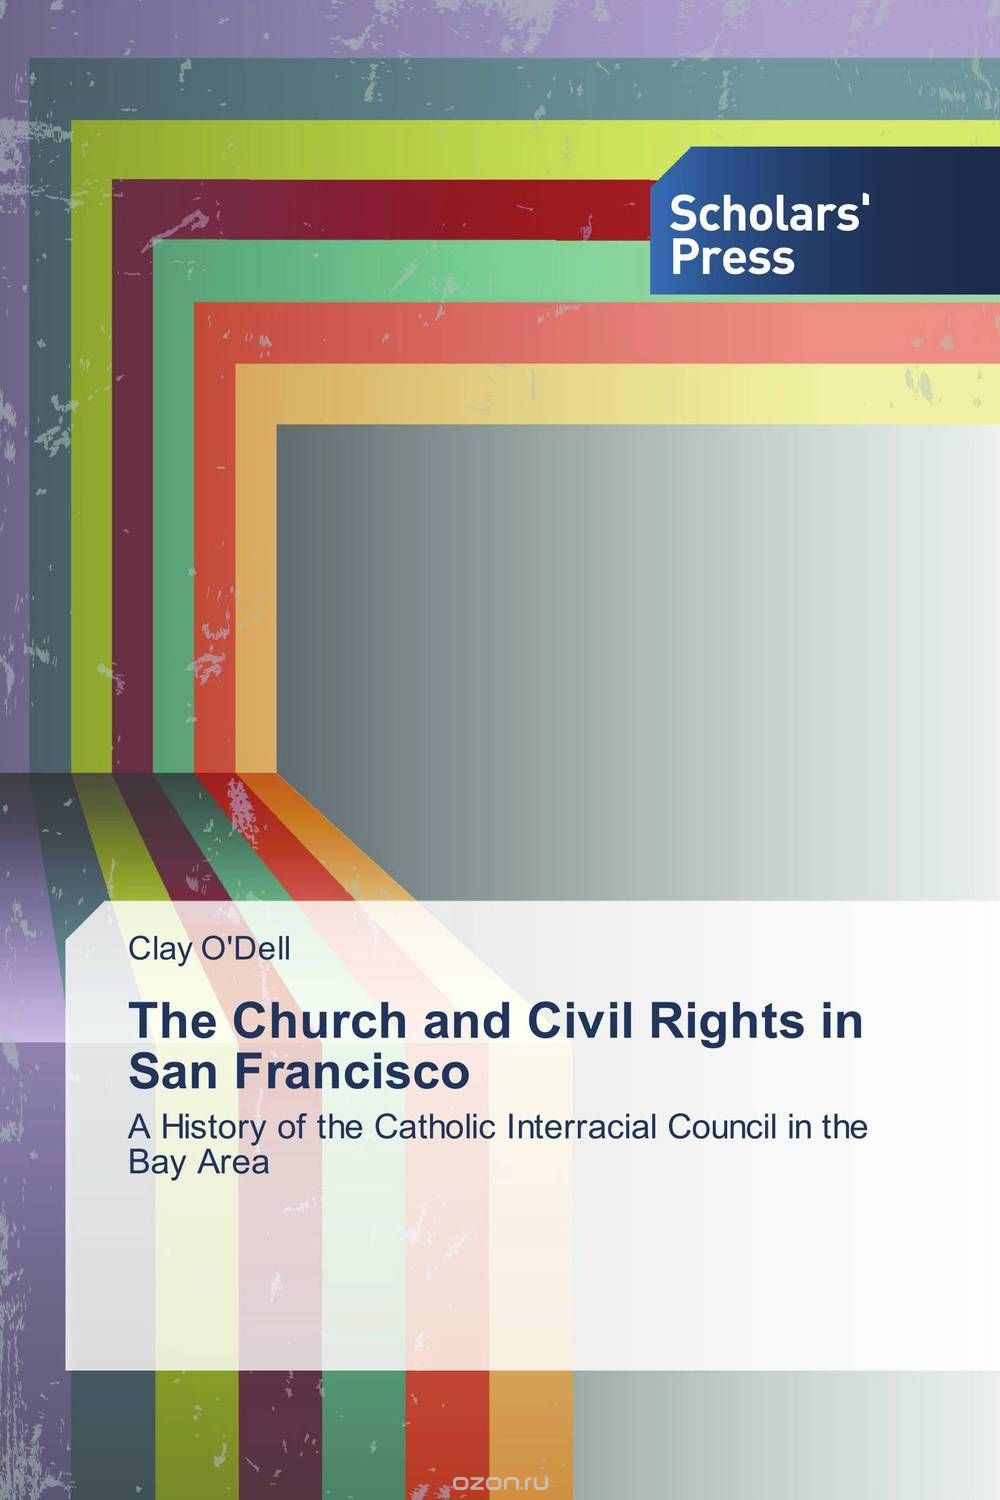 The Church and Civil Rights in San Francisco